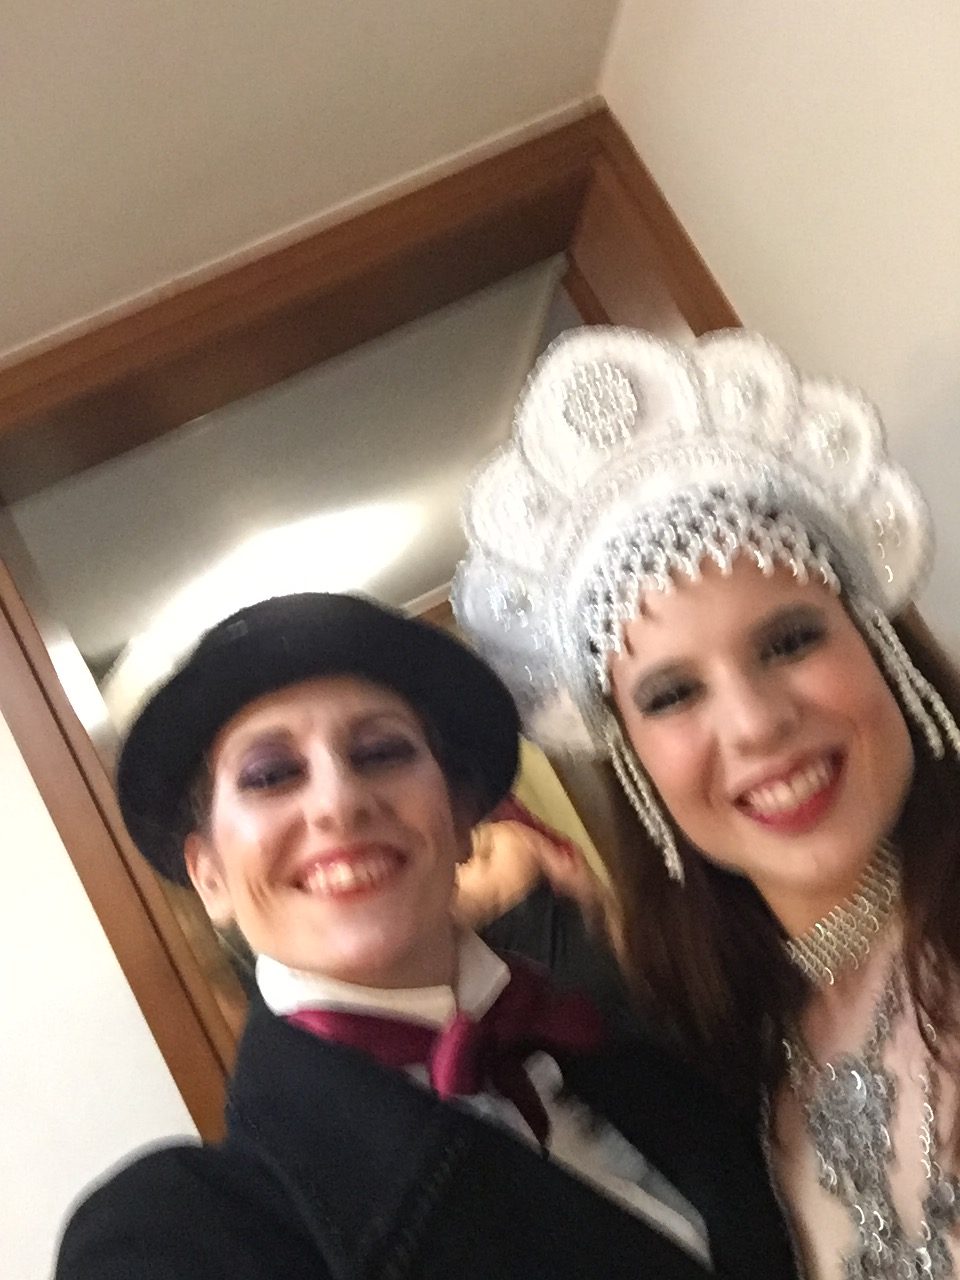 Vintage Circus & Burlesque - May 2018 @ Teatrò, Abano Terme - The True Story of Mary Poppins - Backstage room-mate